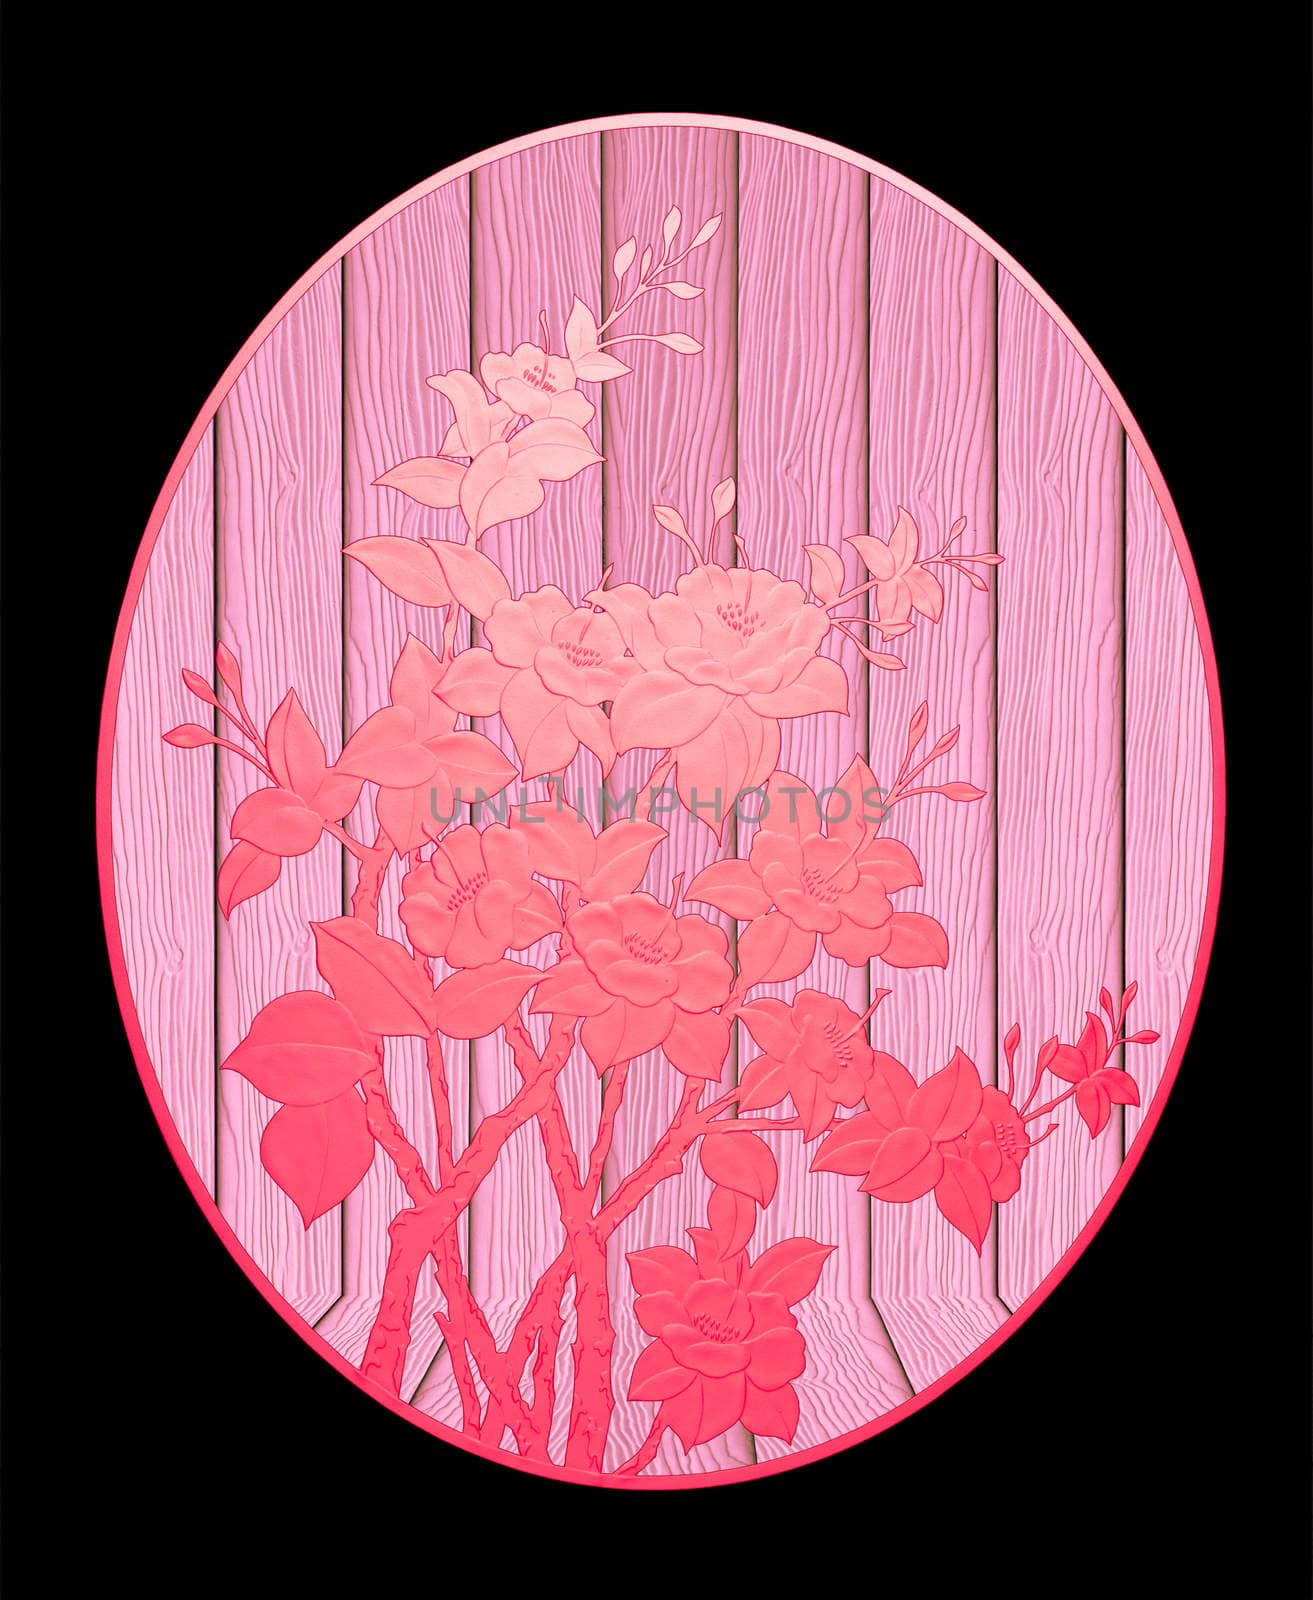 Pattern of Red flower on wood with black background by Gamjai